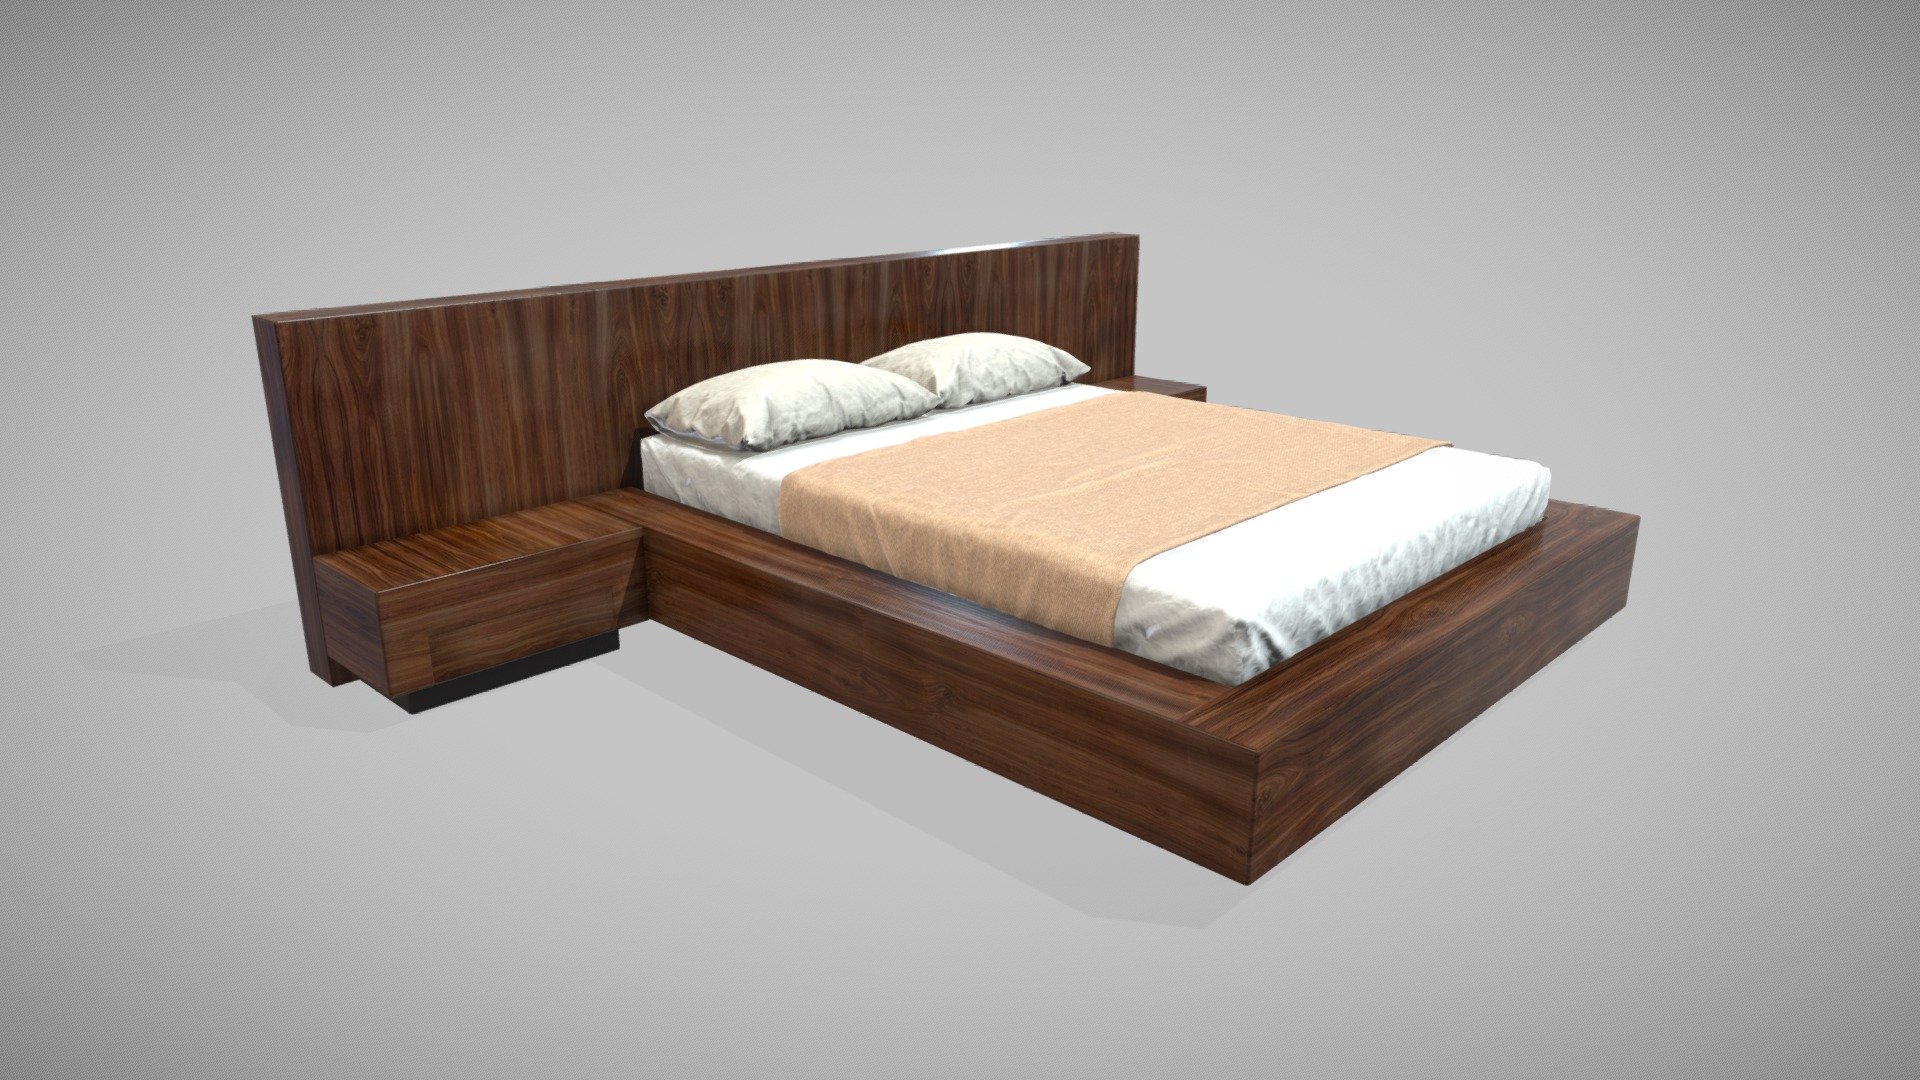 This is a 3D model of a Bed with Wooden Headboard




Made in Blender 3.x (PBR Materials) and Rendering Cycles.

Main rendering made in Blender 3.x + Cycles using some HDR Environment Textures Images for lighting which is NOT provided in the package!

What does this package include?




3D Modeling of a Bed with Wooden Headboard

4K Textures (Base Color, Normal Map, Metallic ,Roughness, Ambient Occlusion)

Important notes




File format included - (Blend, FBX, OBJ, GLB, STL)

Texture size - 4K

Uvs non - overlapping

Polygon: Quads

Centered at 0,0,0

In some formats may be needed to reassign textures and add HDR Environment Textures Images for lighting.

Not lights include

No special plugin needed to open the scene.

If you like my work, please leave your comment and like, it helps me a lot to create new content. If you have any questions or changes about colors or another thing, you can contact me at we3domodel@gmail.com - Bed with Wooden Headboard Low Poly - Buy Royalty Free 3D model by We3Do (@we3DoModel) 3d model